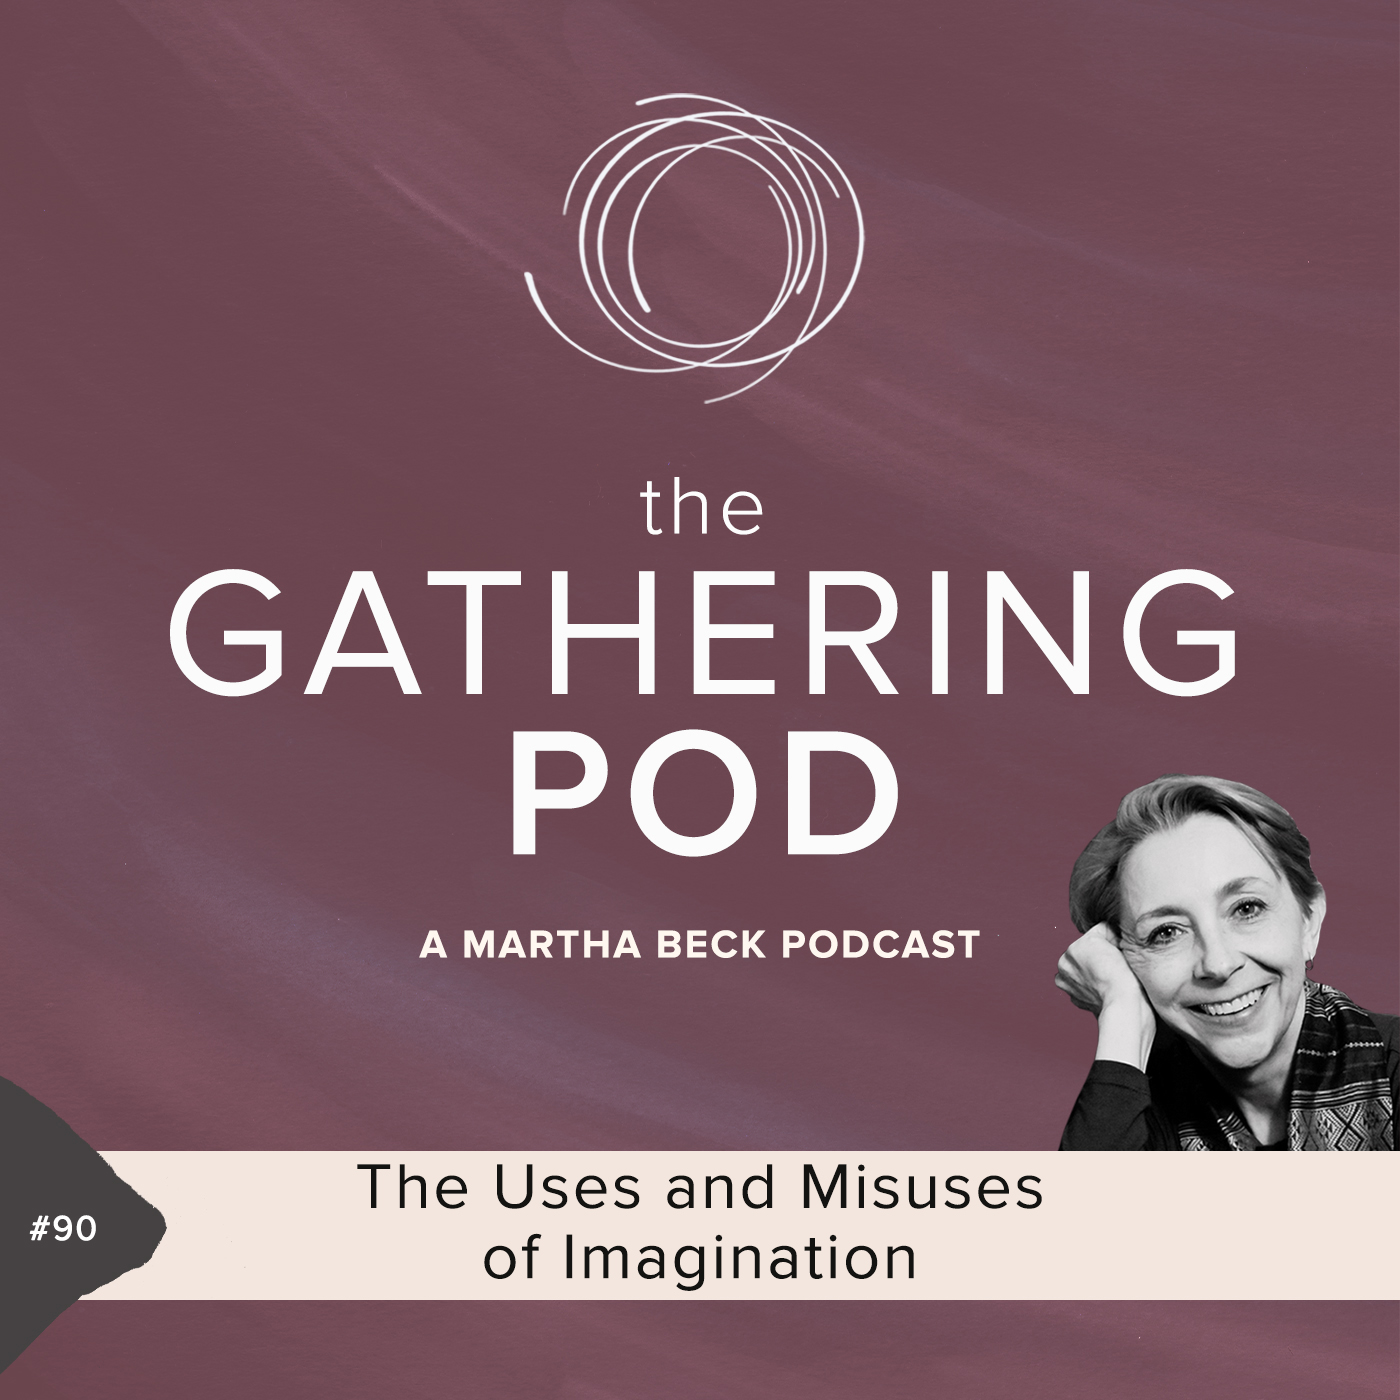 Image for The Gathering Pod A Martha Beck Podcast Episode #90 The Uses and Misuses of Imagination